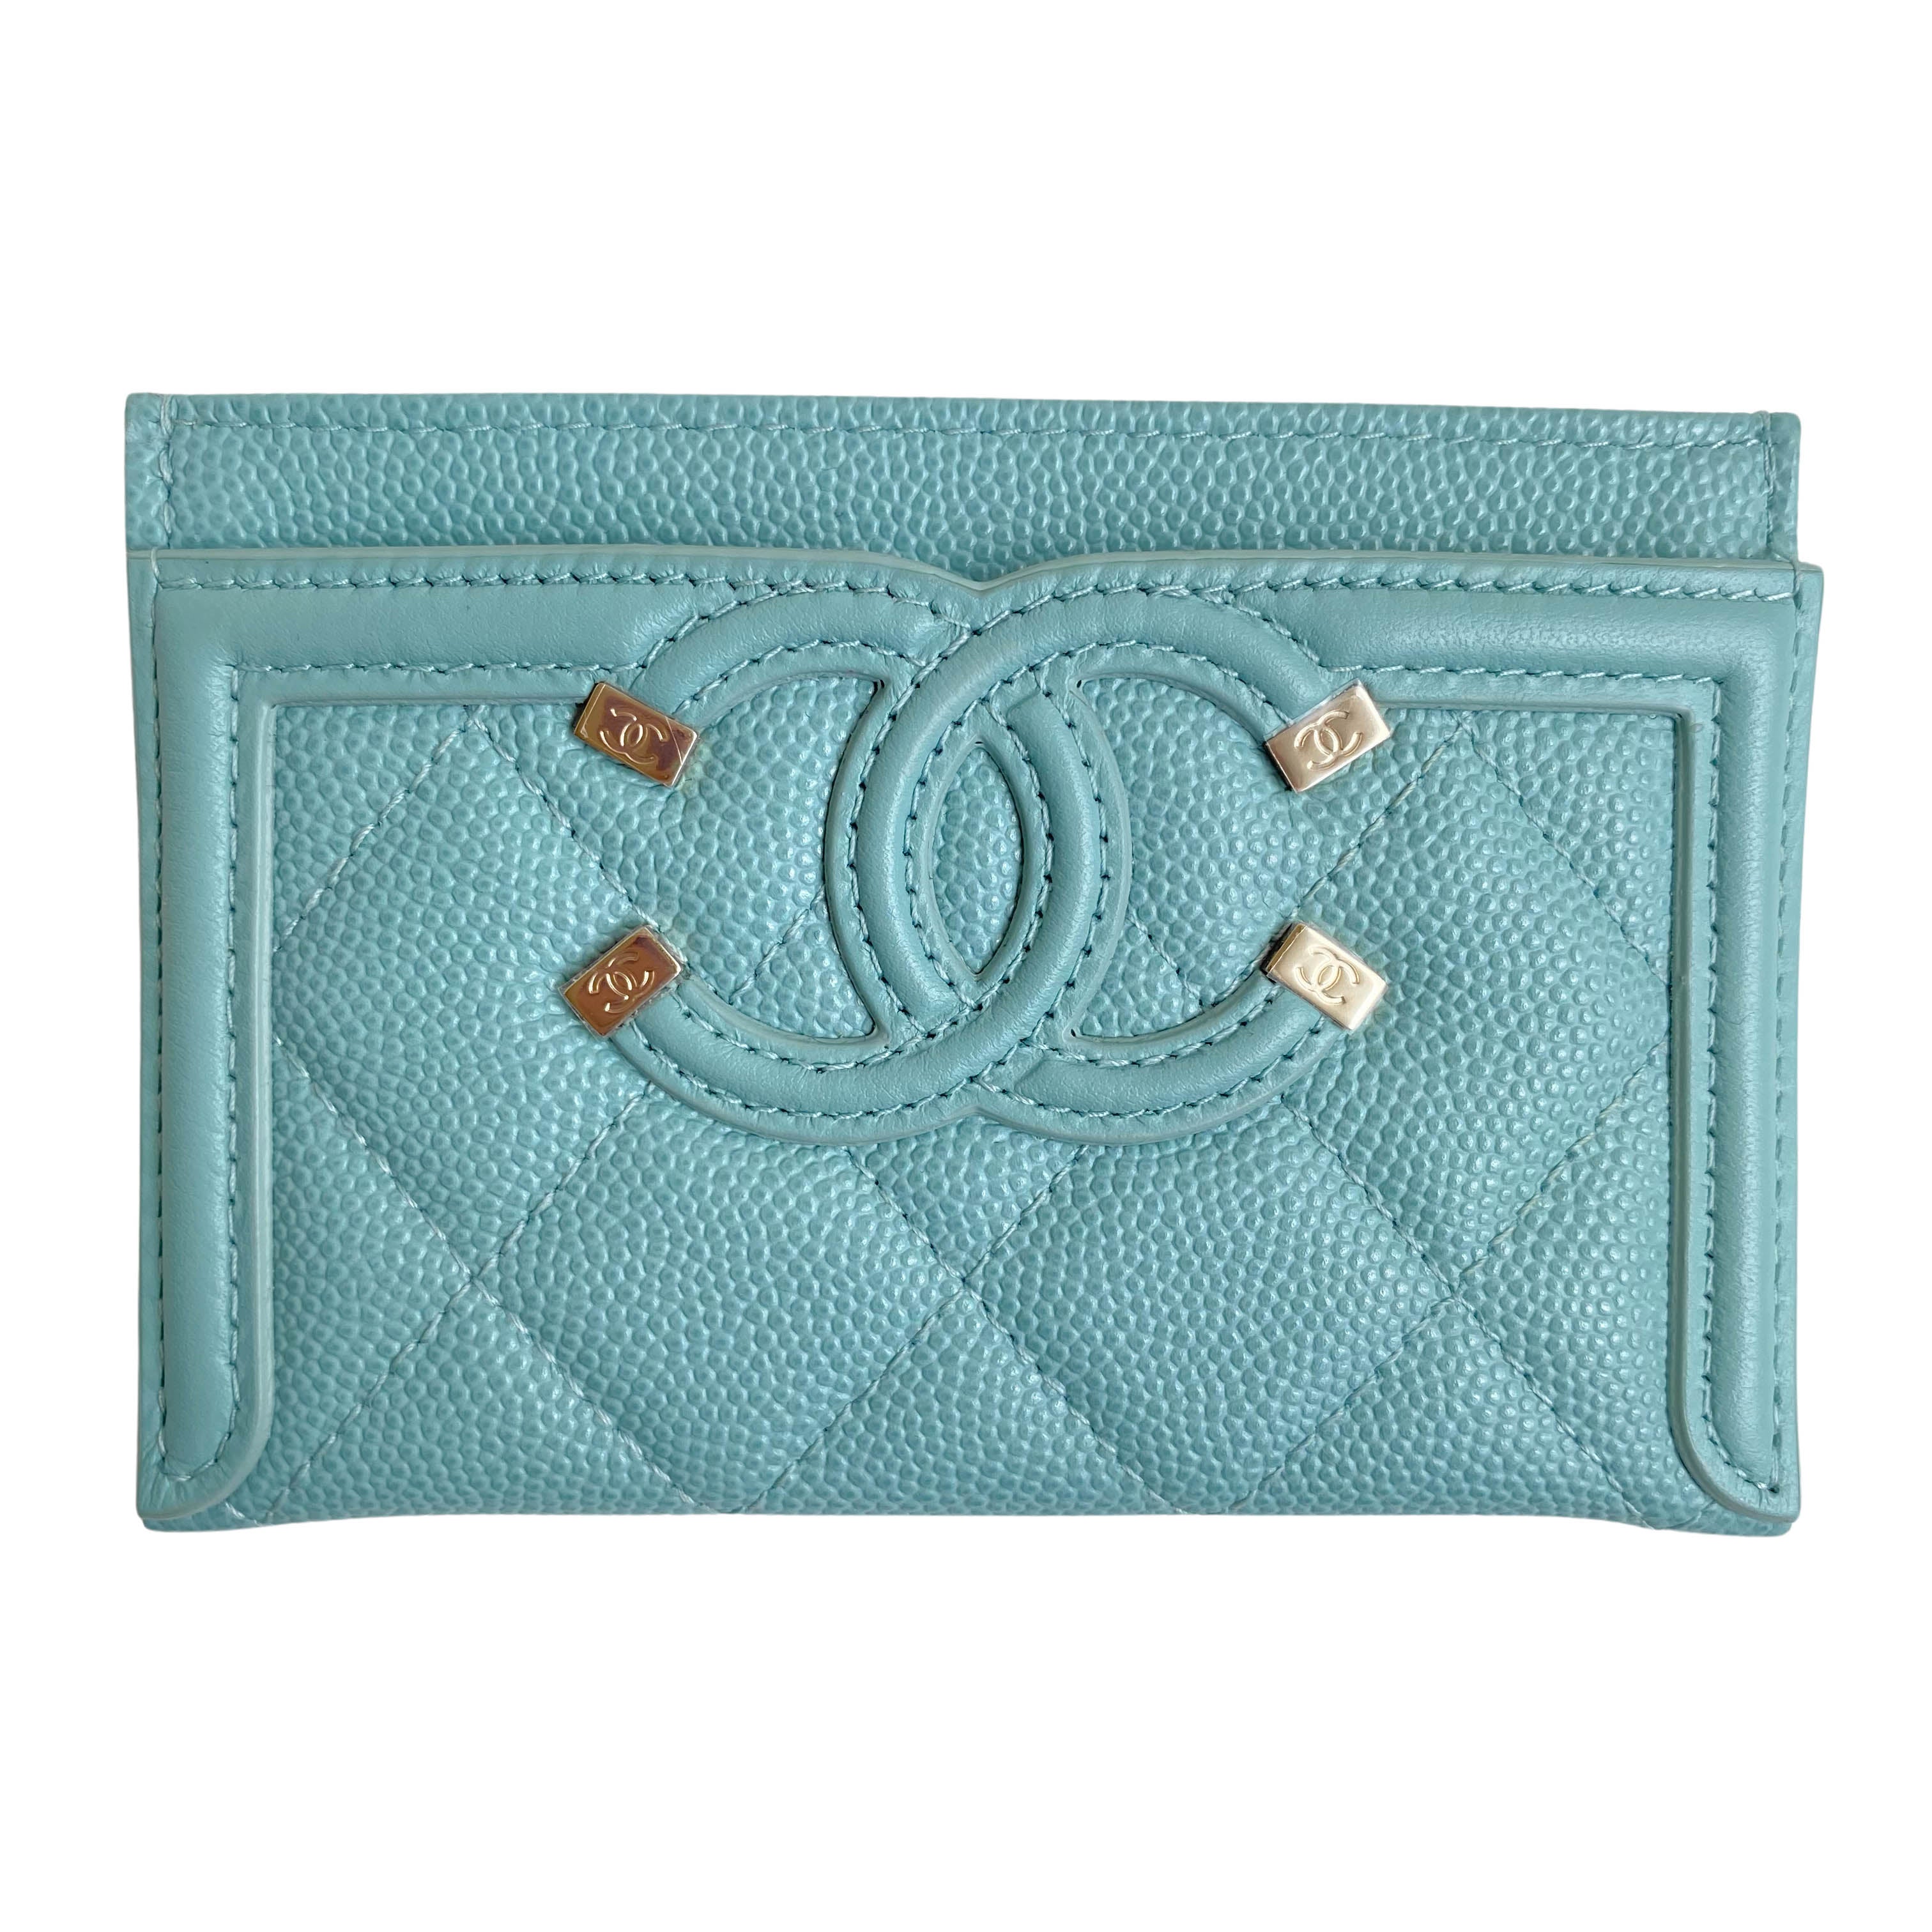 CHANEL Caviar Quilted CC Filigree Card Holder Pink Blue Green 352205